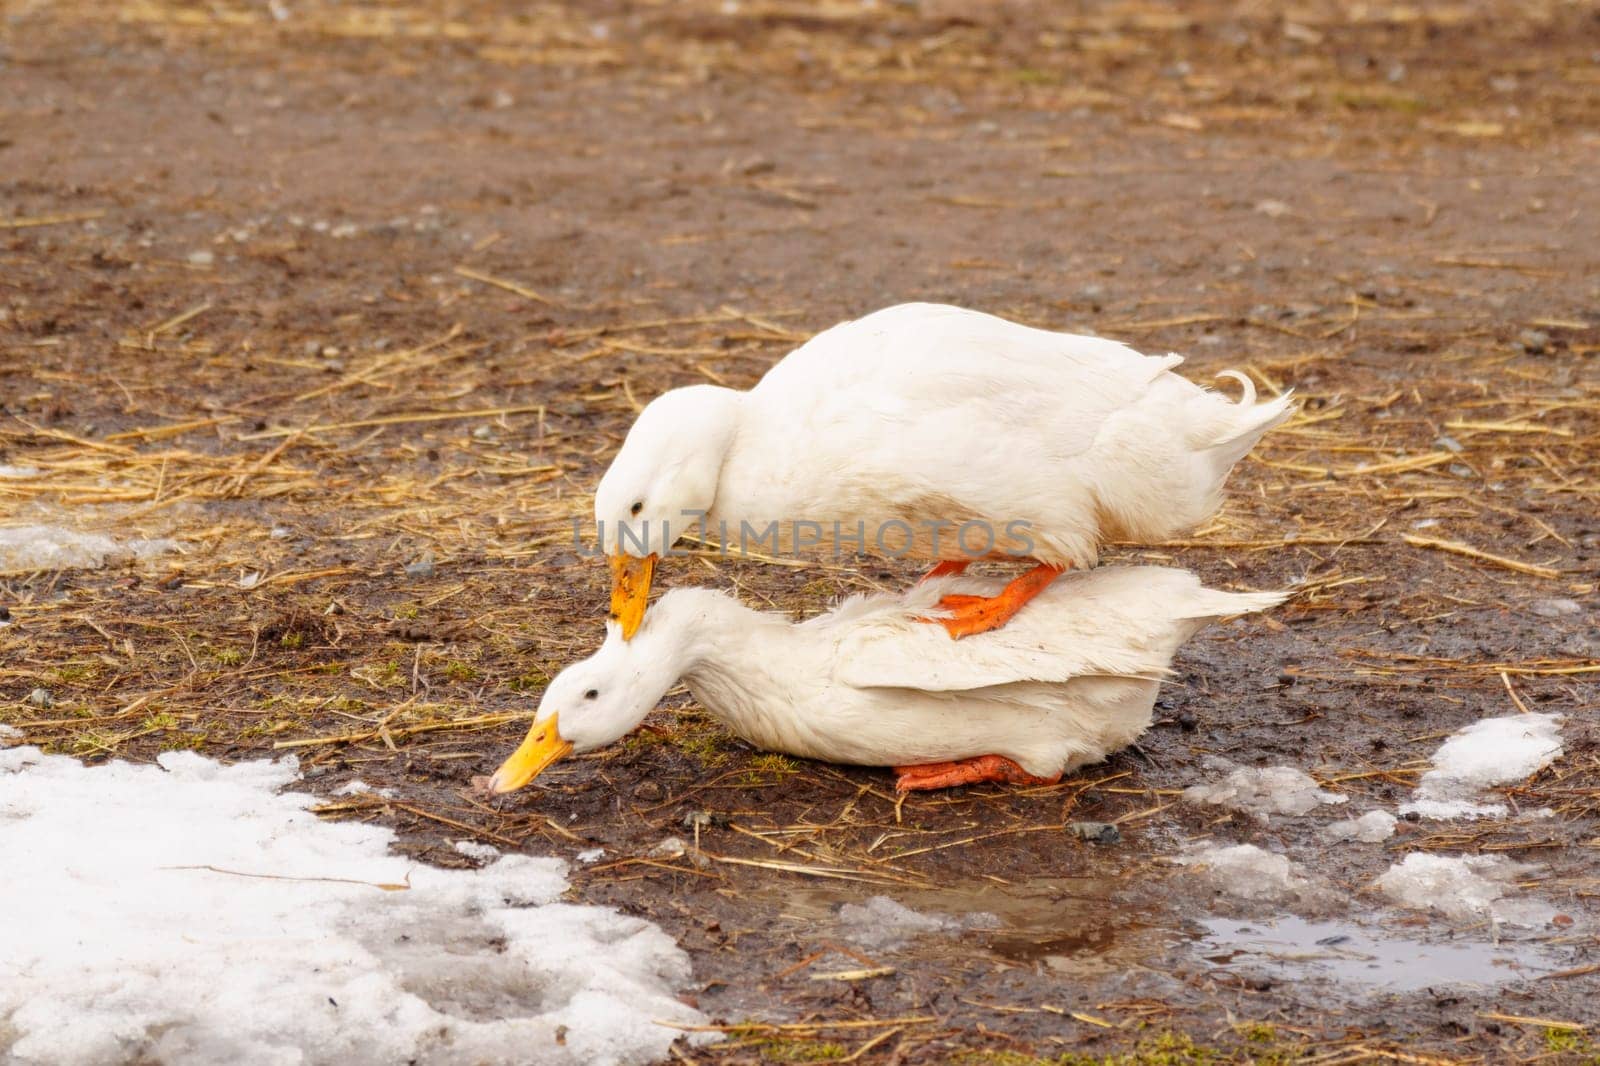 Ducks confidently stand on top of a field blanketed in snow, showcasing their resilience and adaptability to winter conditions.